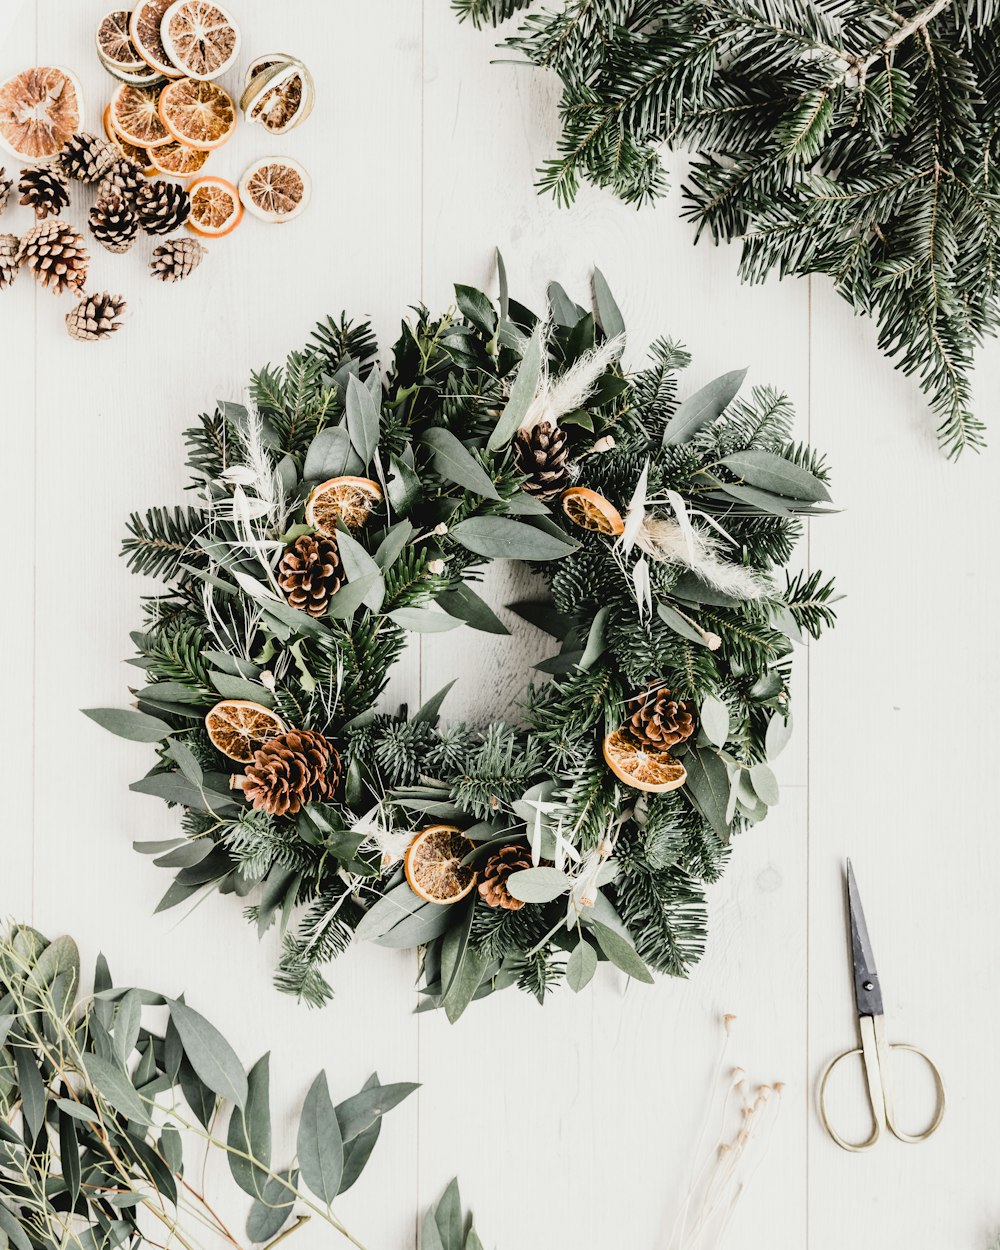 a wreath with pine cones and evergreen leaves